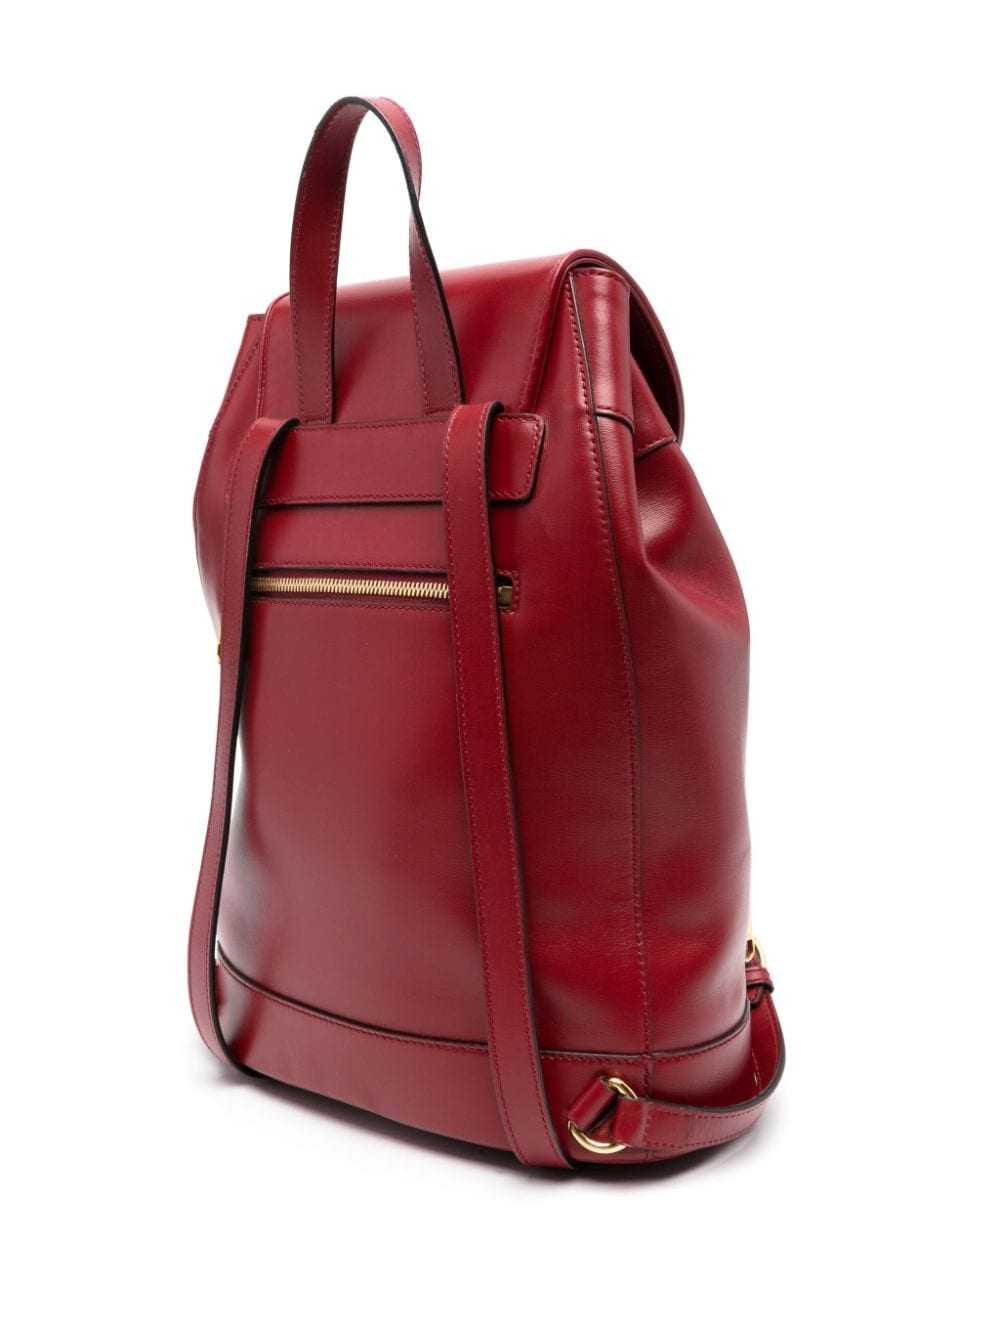 Gucci Pre-Owned Horsebit 1955 backpack - Red - image 3